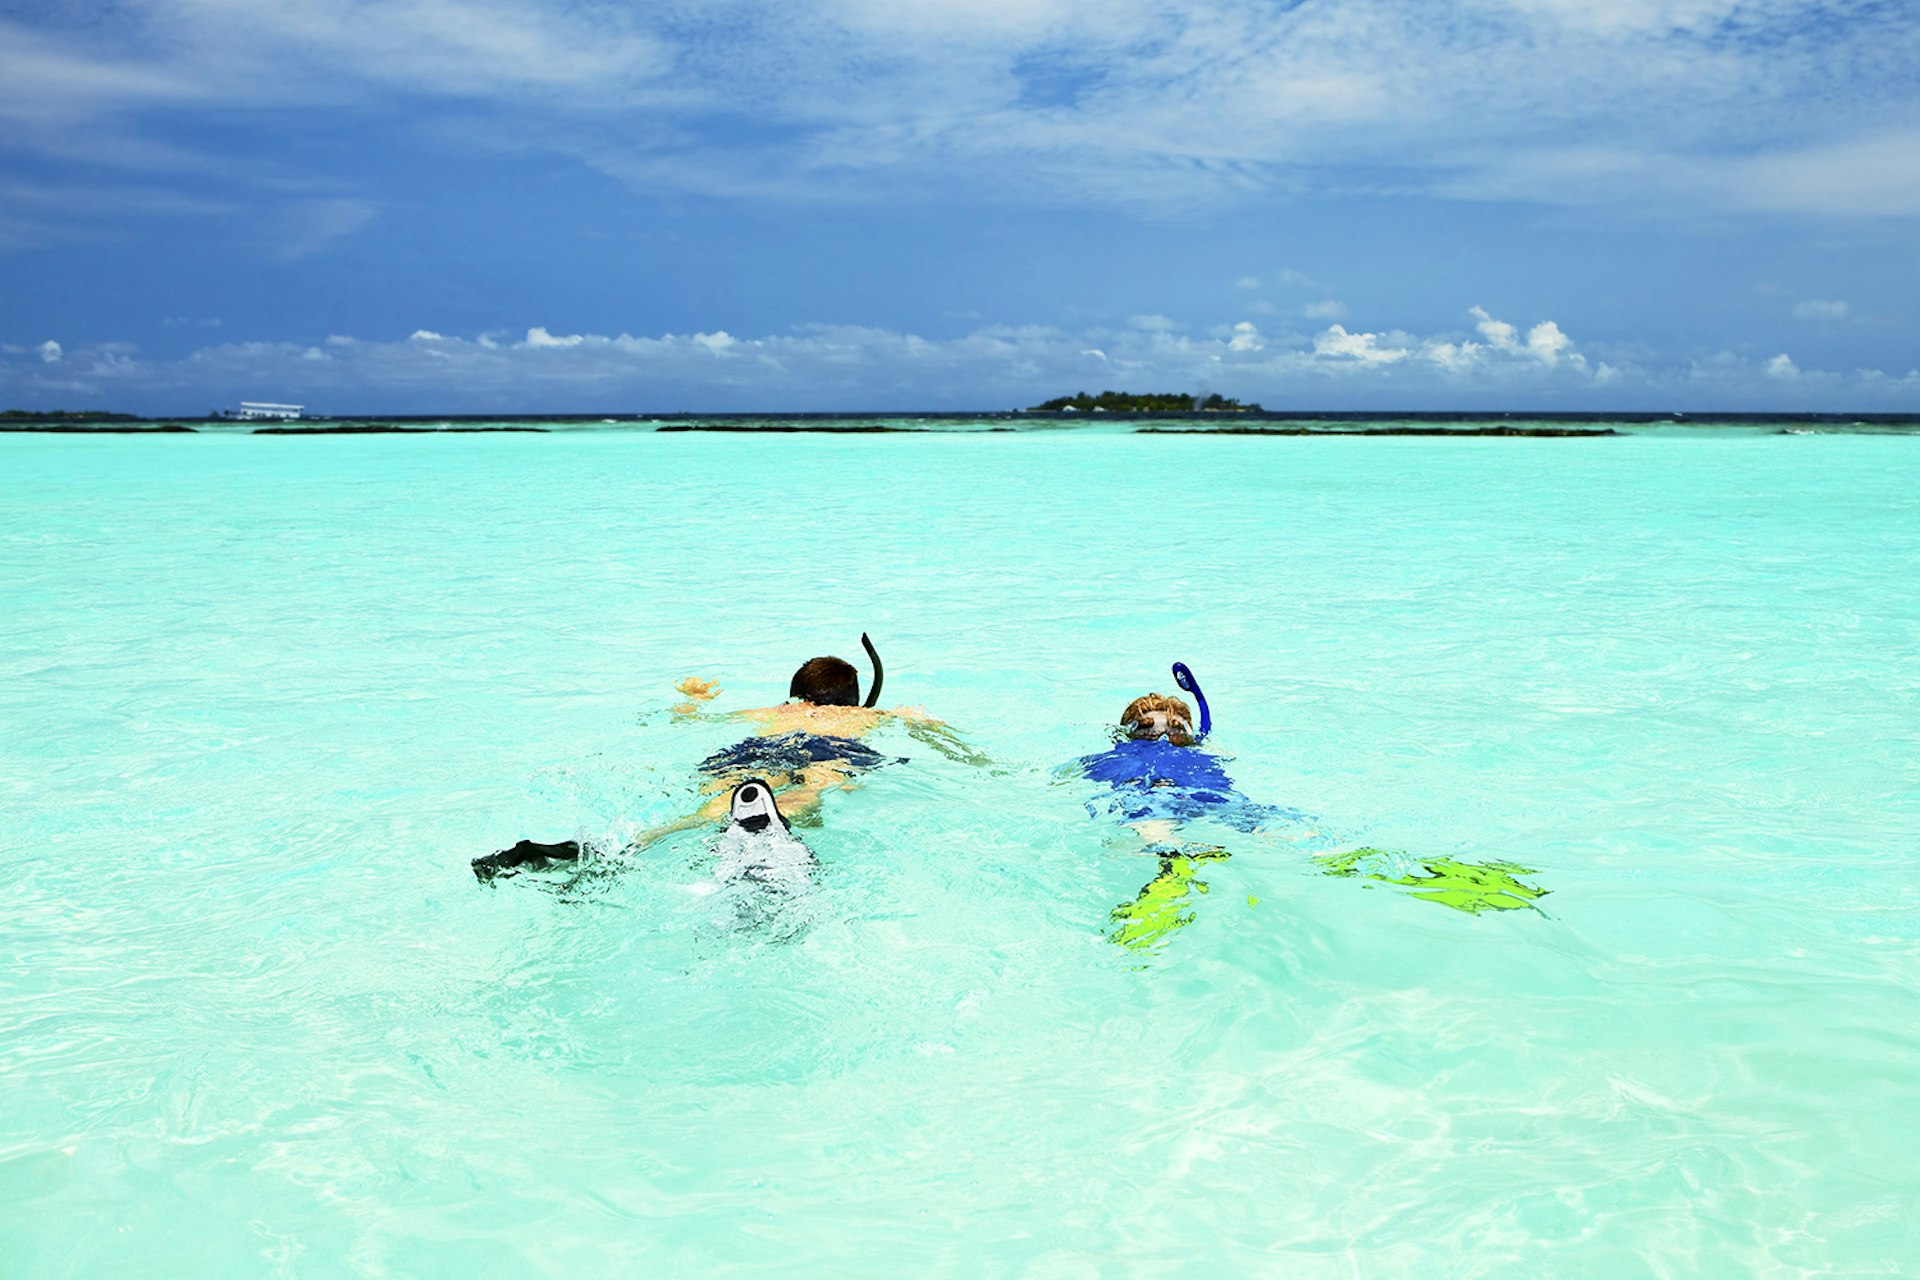 The Maldives might be synonymous with honeymoons, but it's great for the kids too. Image by WILLSIE / E+ / Getty Images